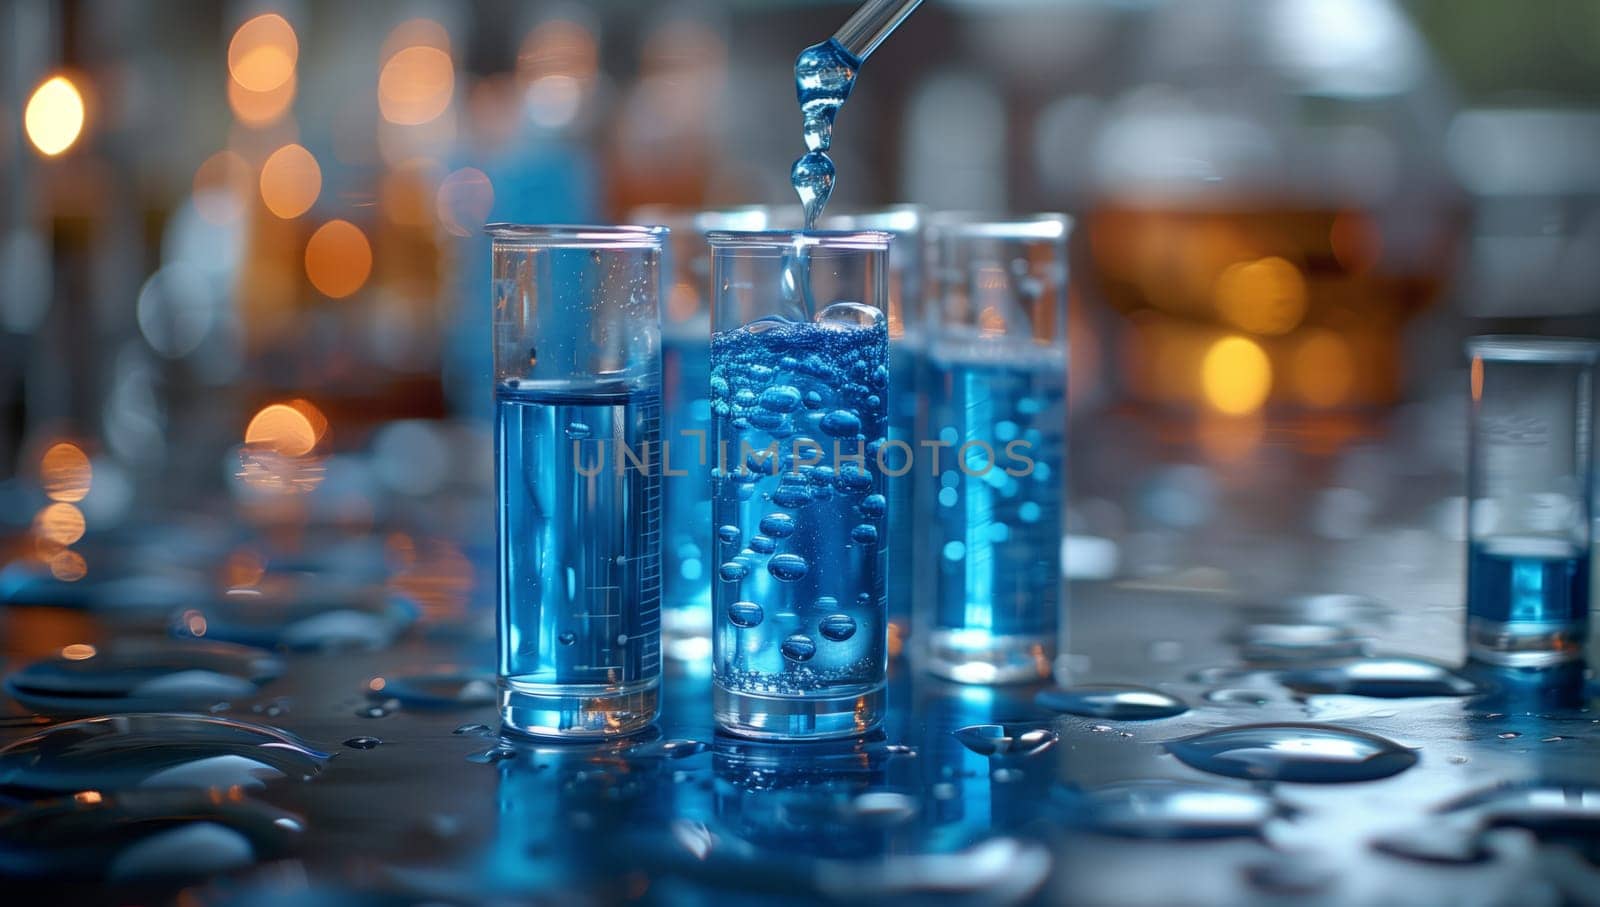 A pipette is transferring blue liquid from a glass bottle into a drinkware glass